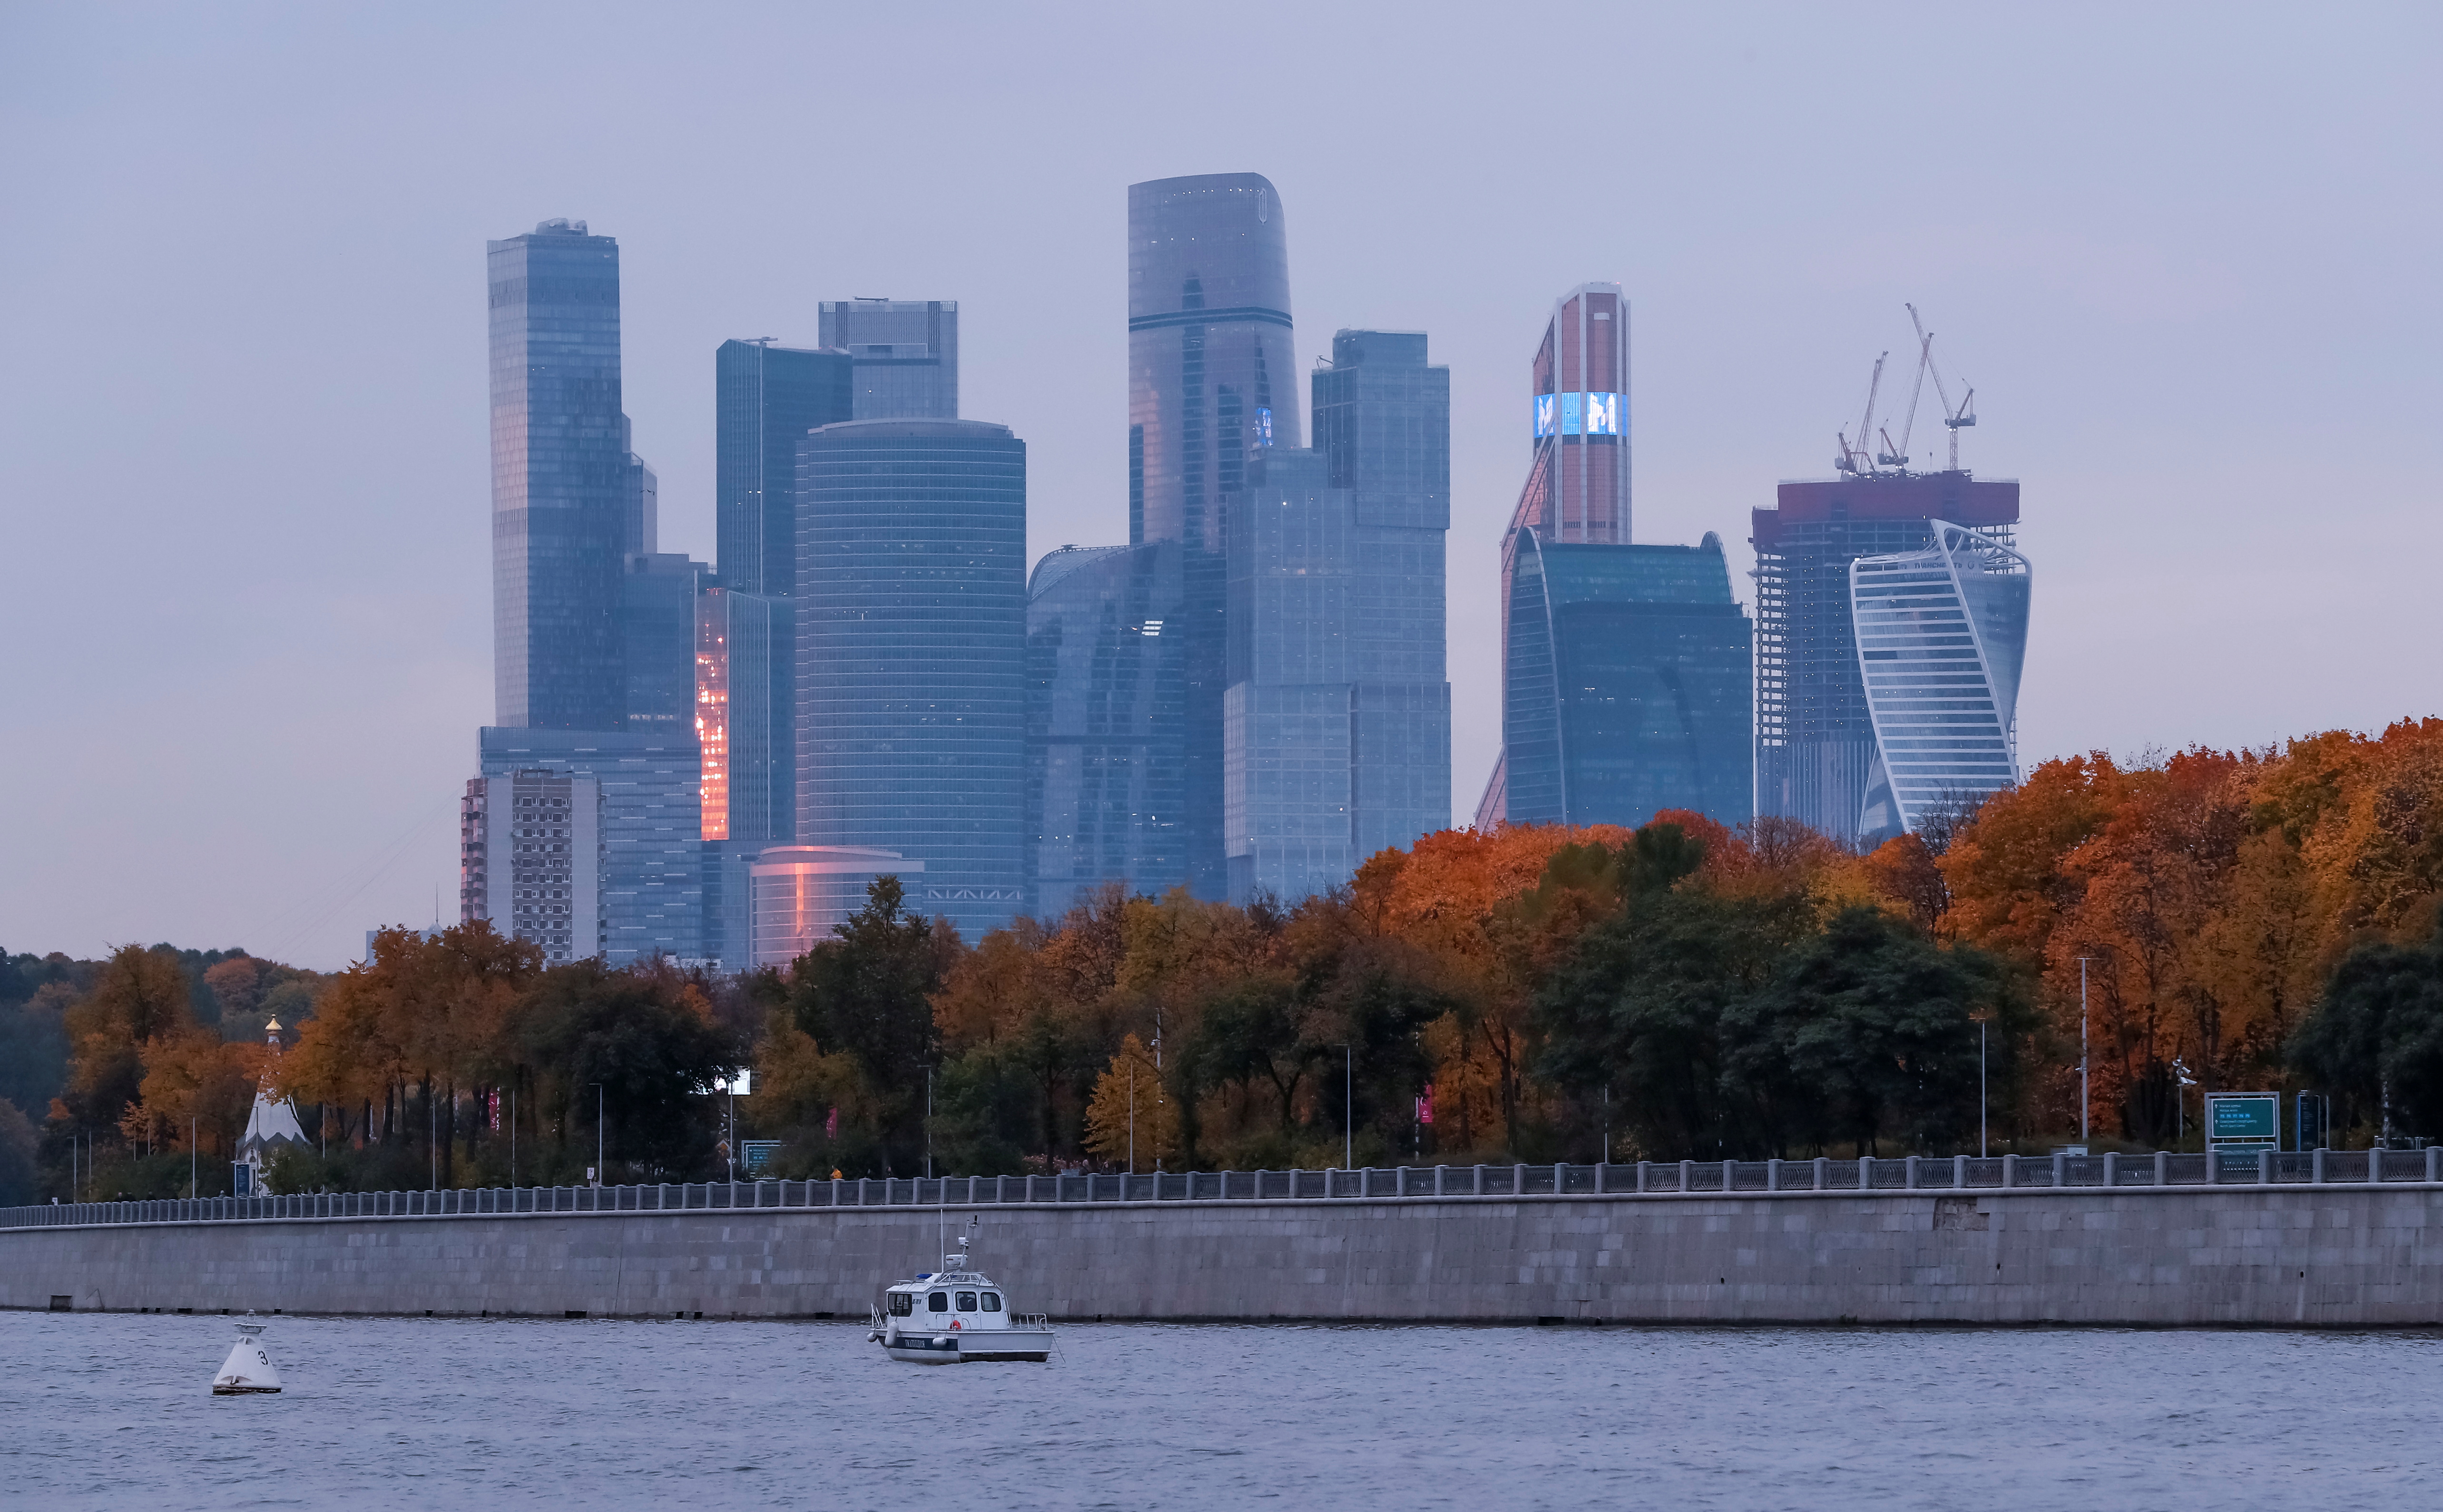 A view of the Moscow International Business Centre at the autumn day